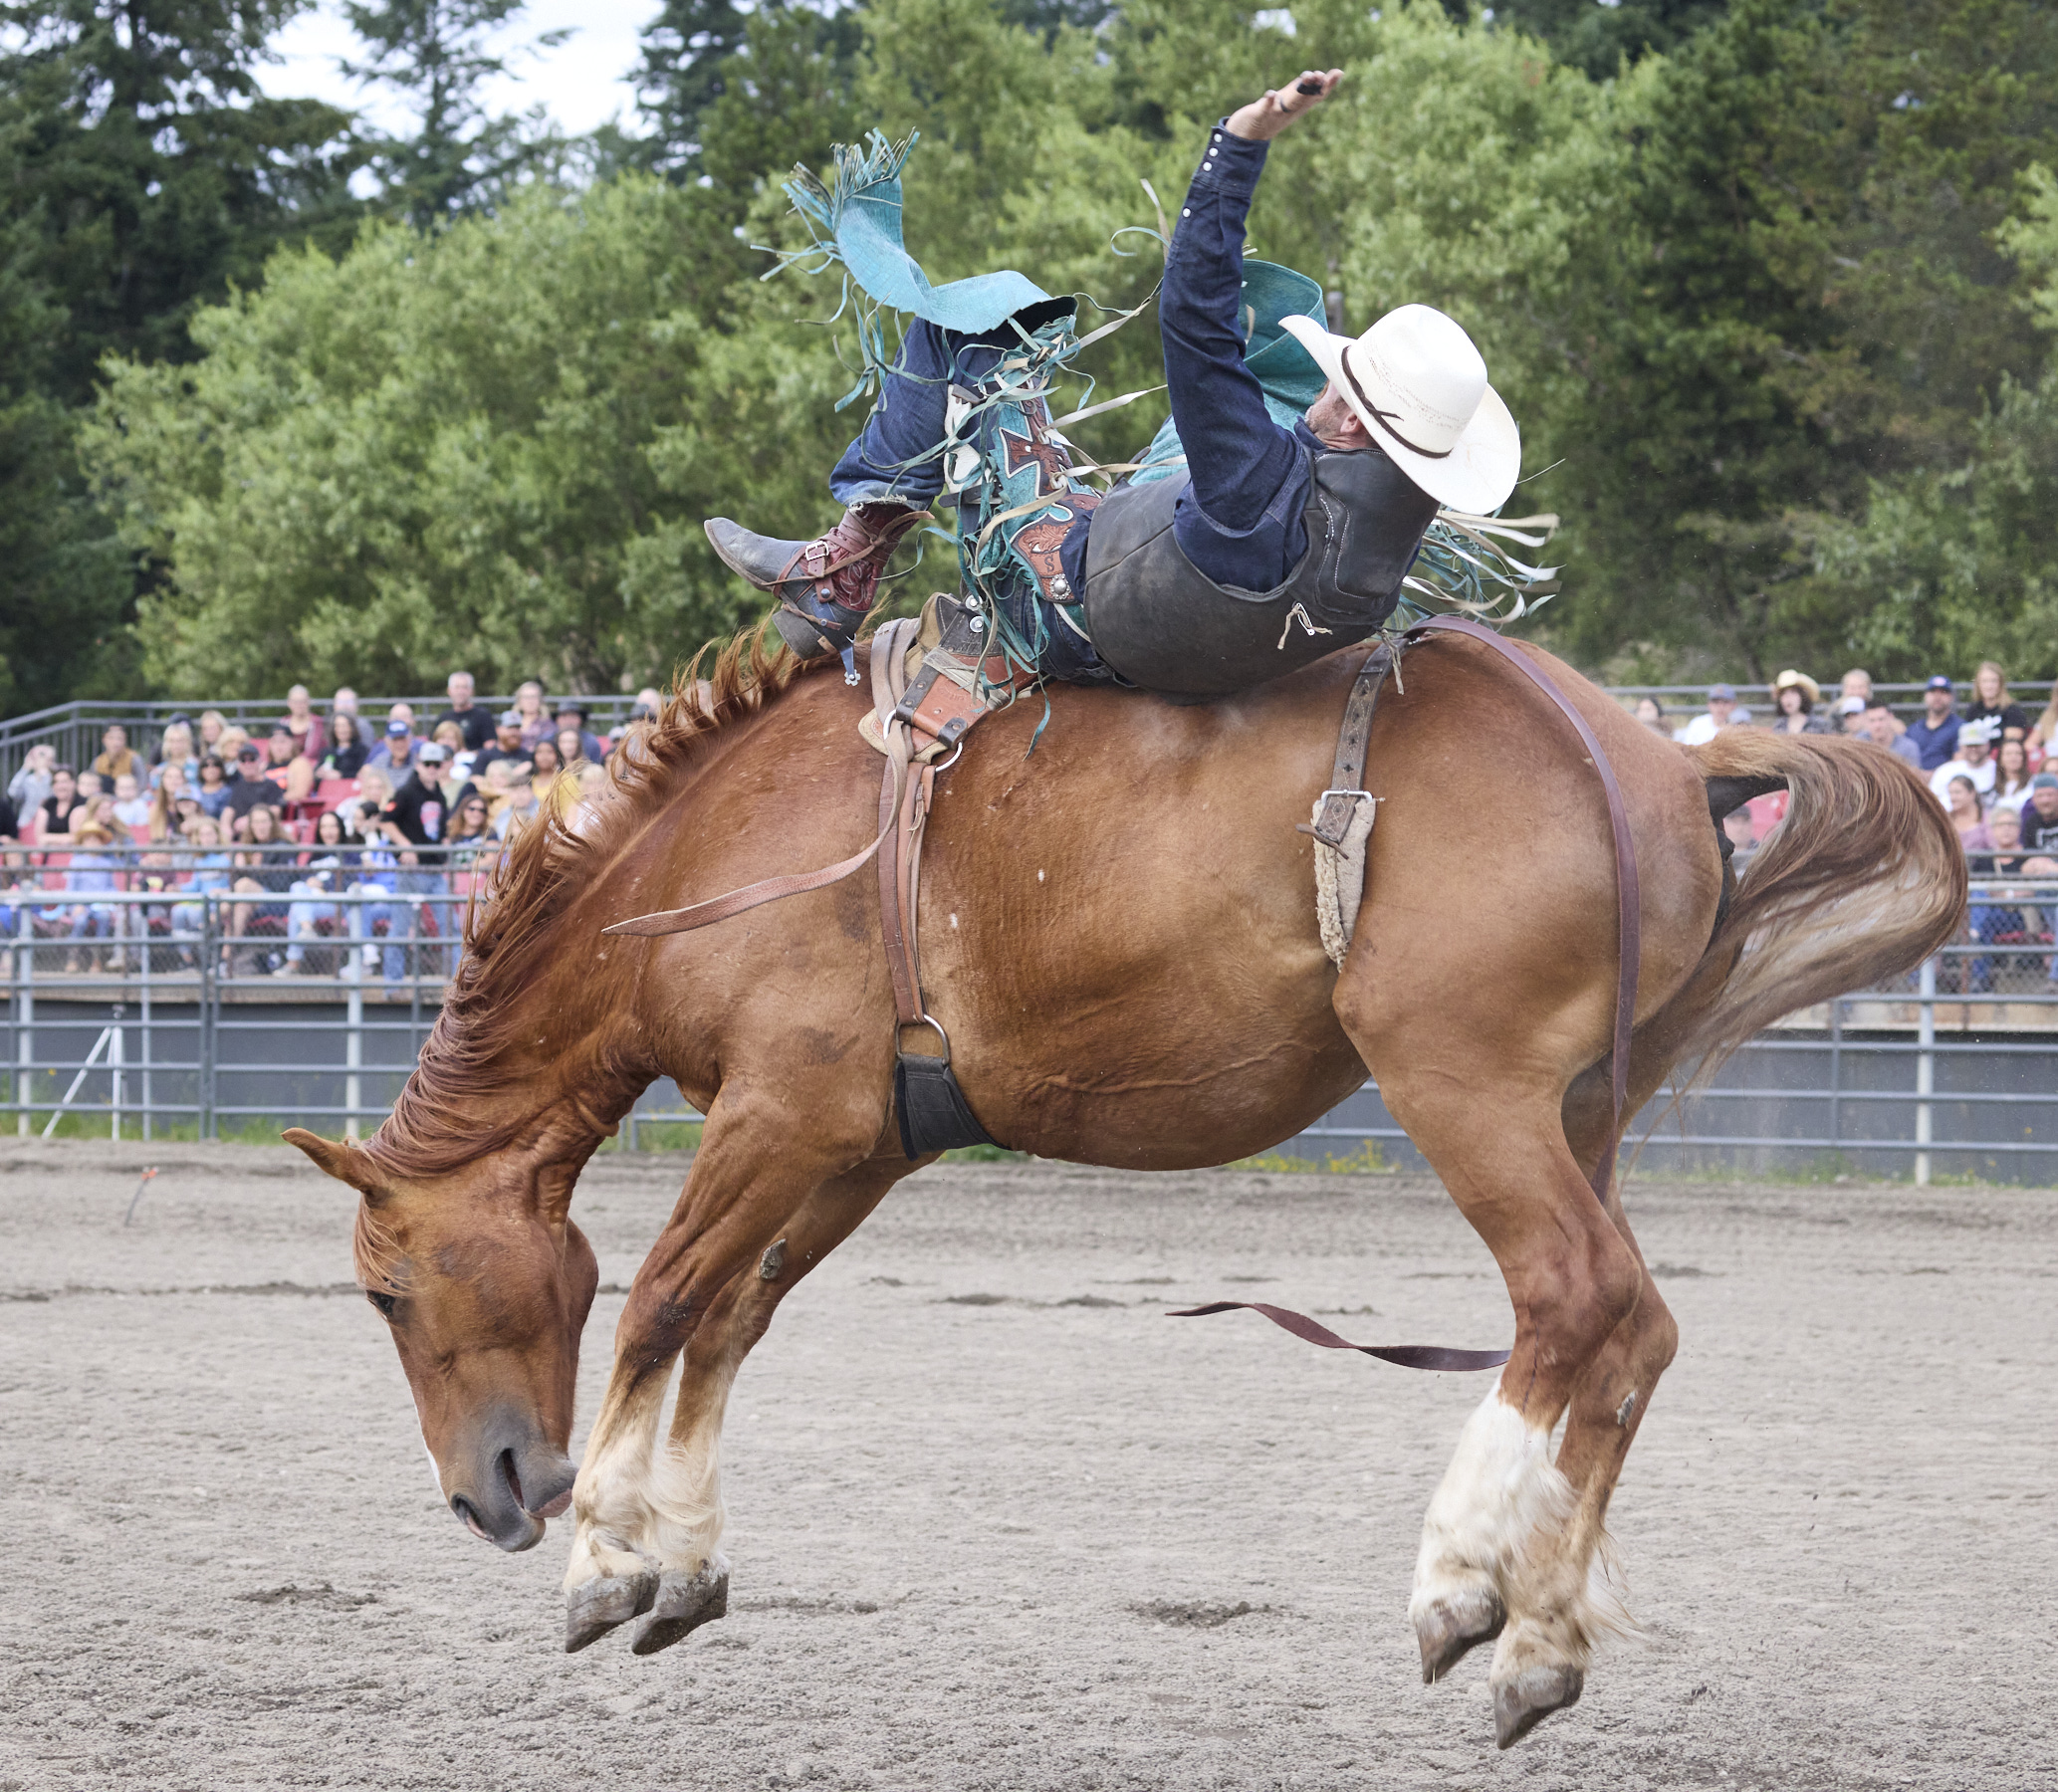 Images Professional Rodeo Photographs